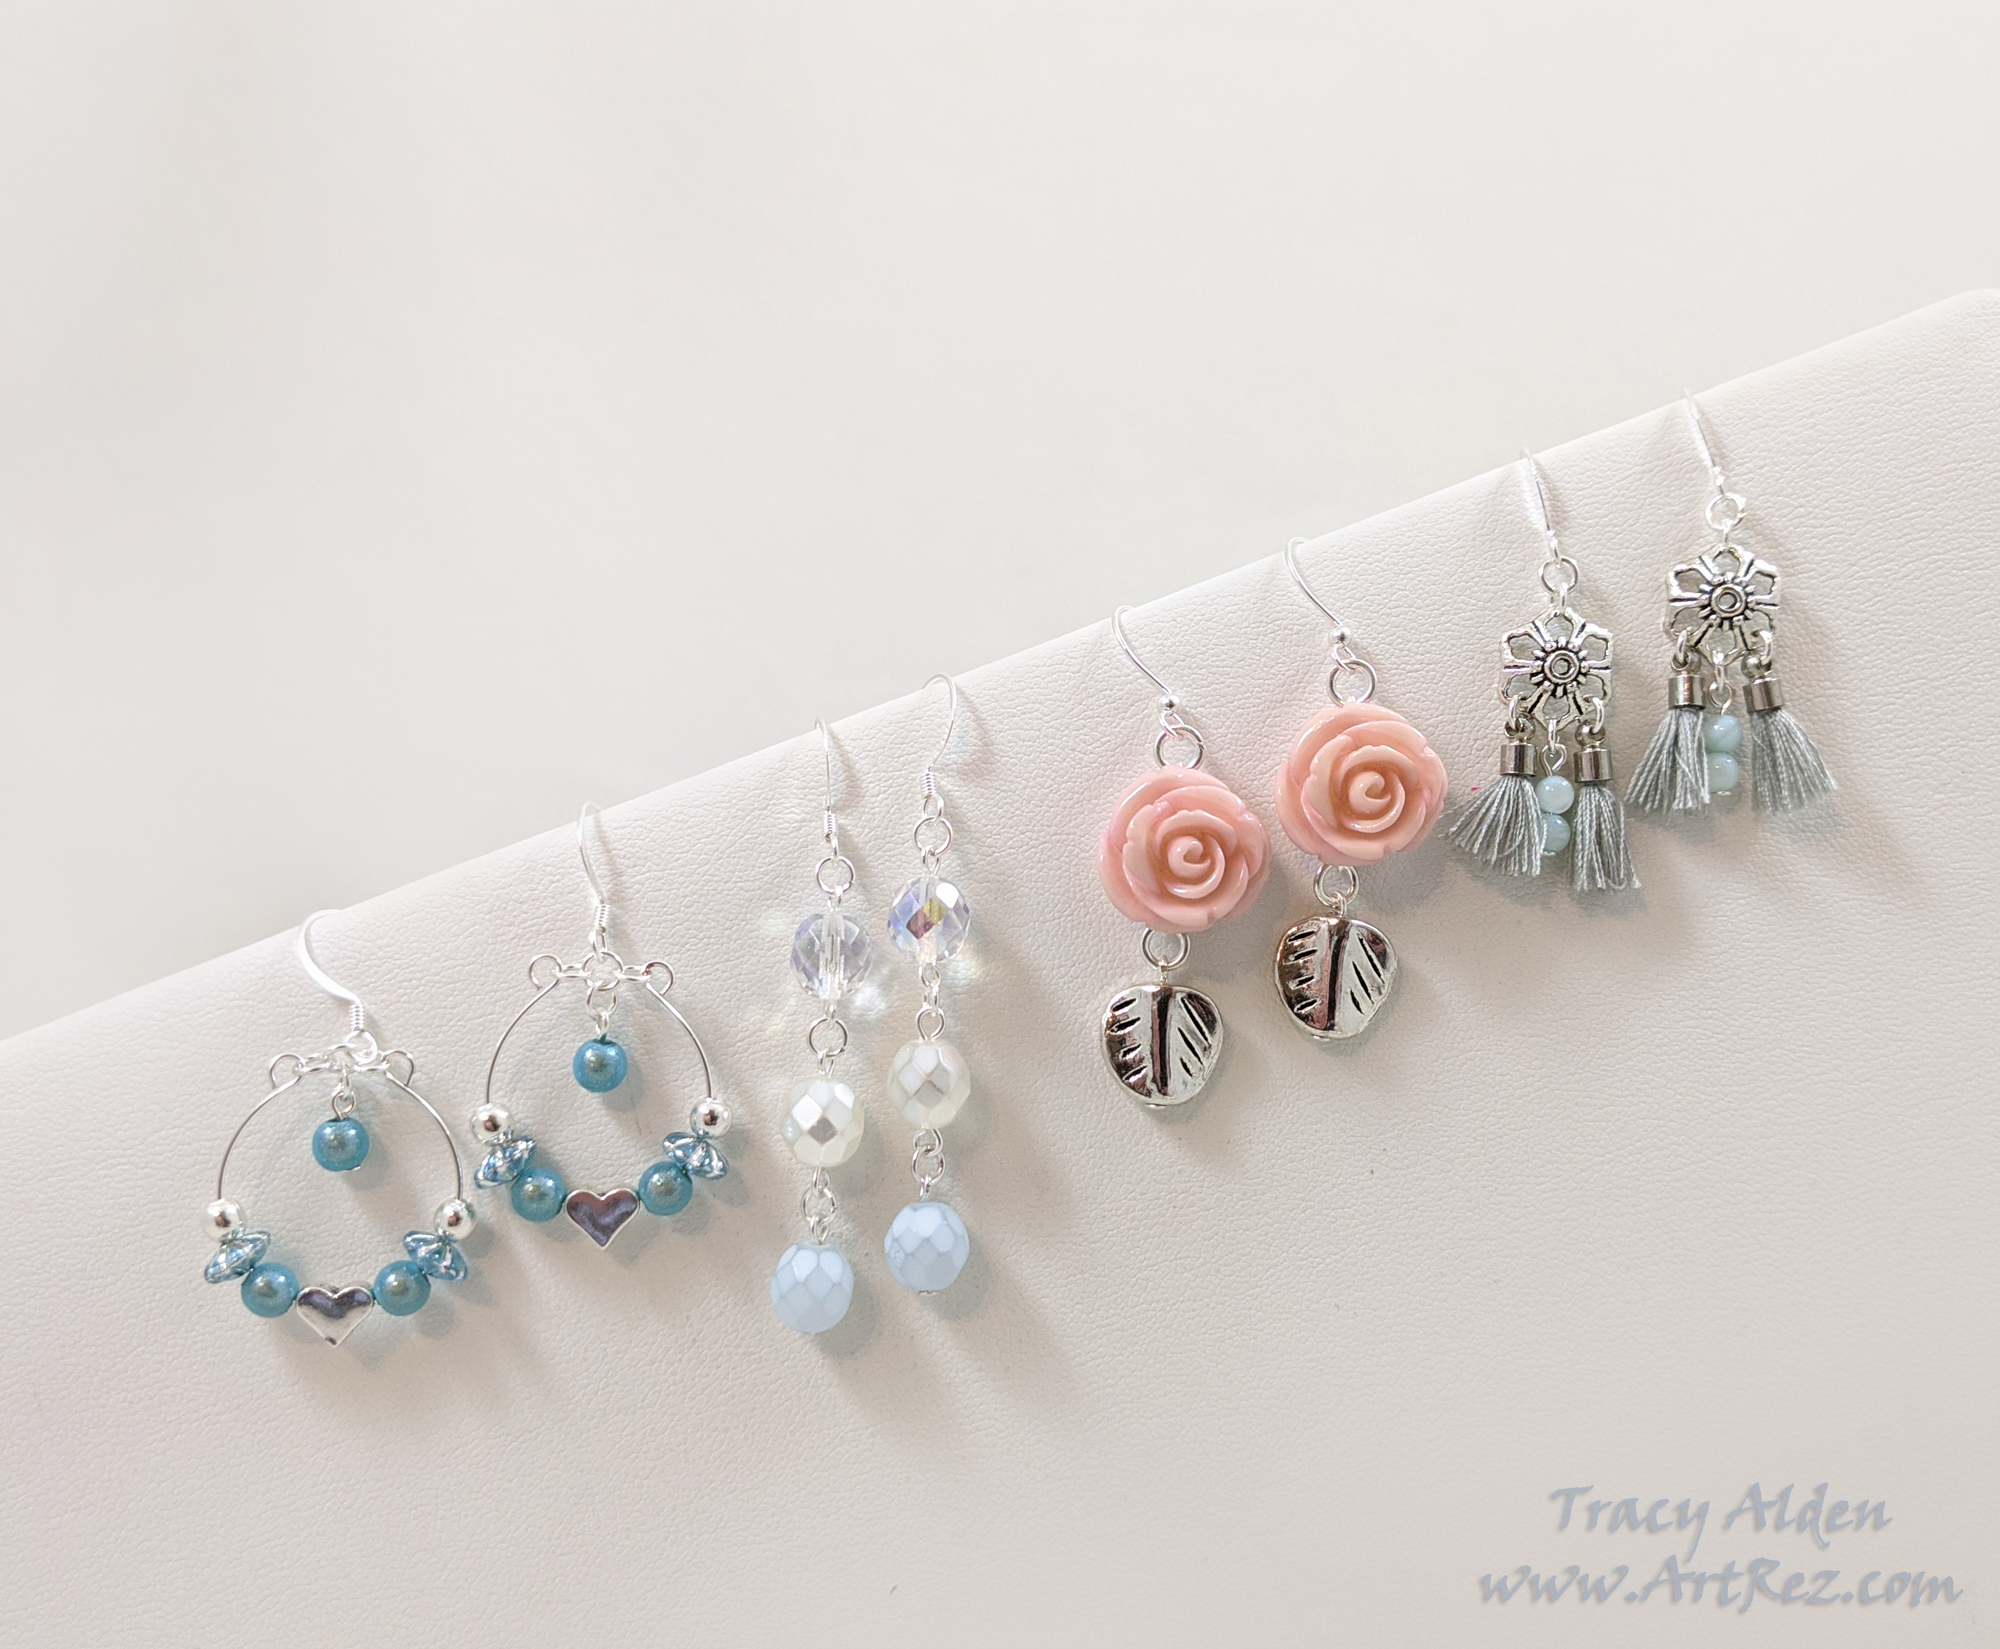 Earrings in pastel blue and pink using Jesse James Beads